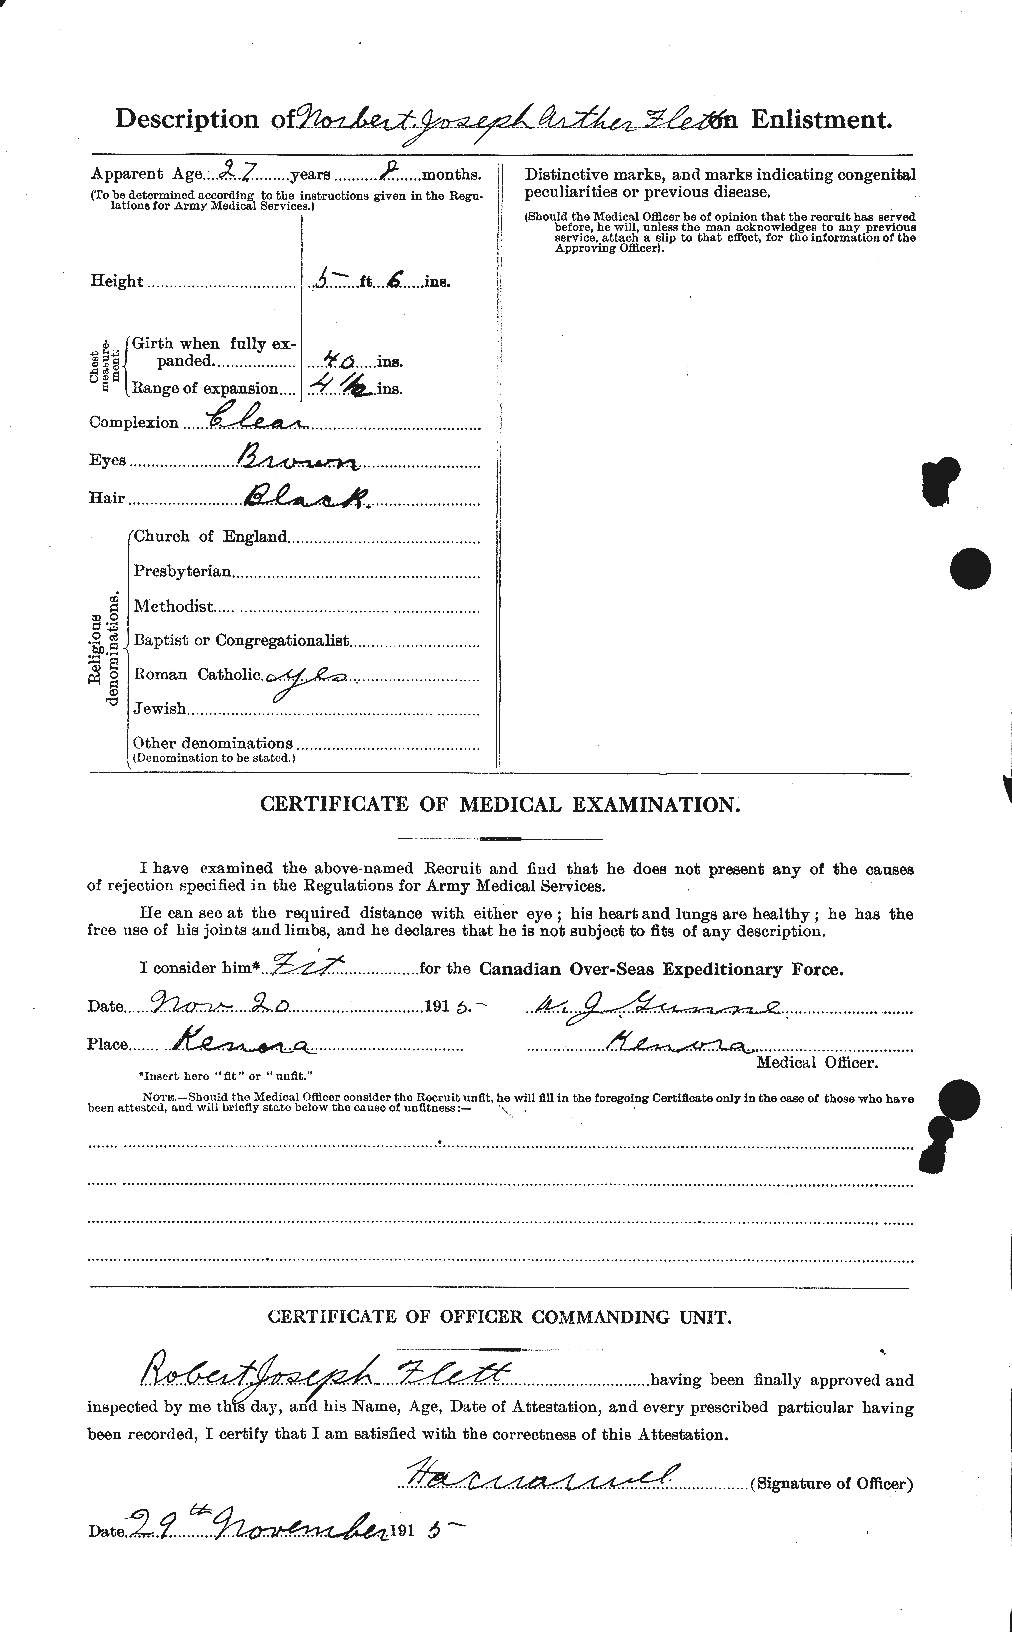 Personnel Records of the First World War - CEF 329798b